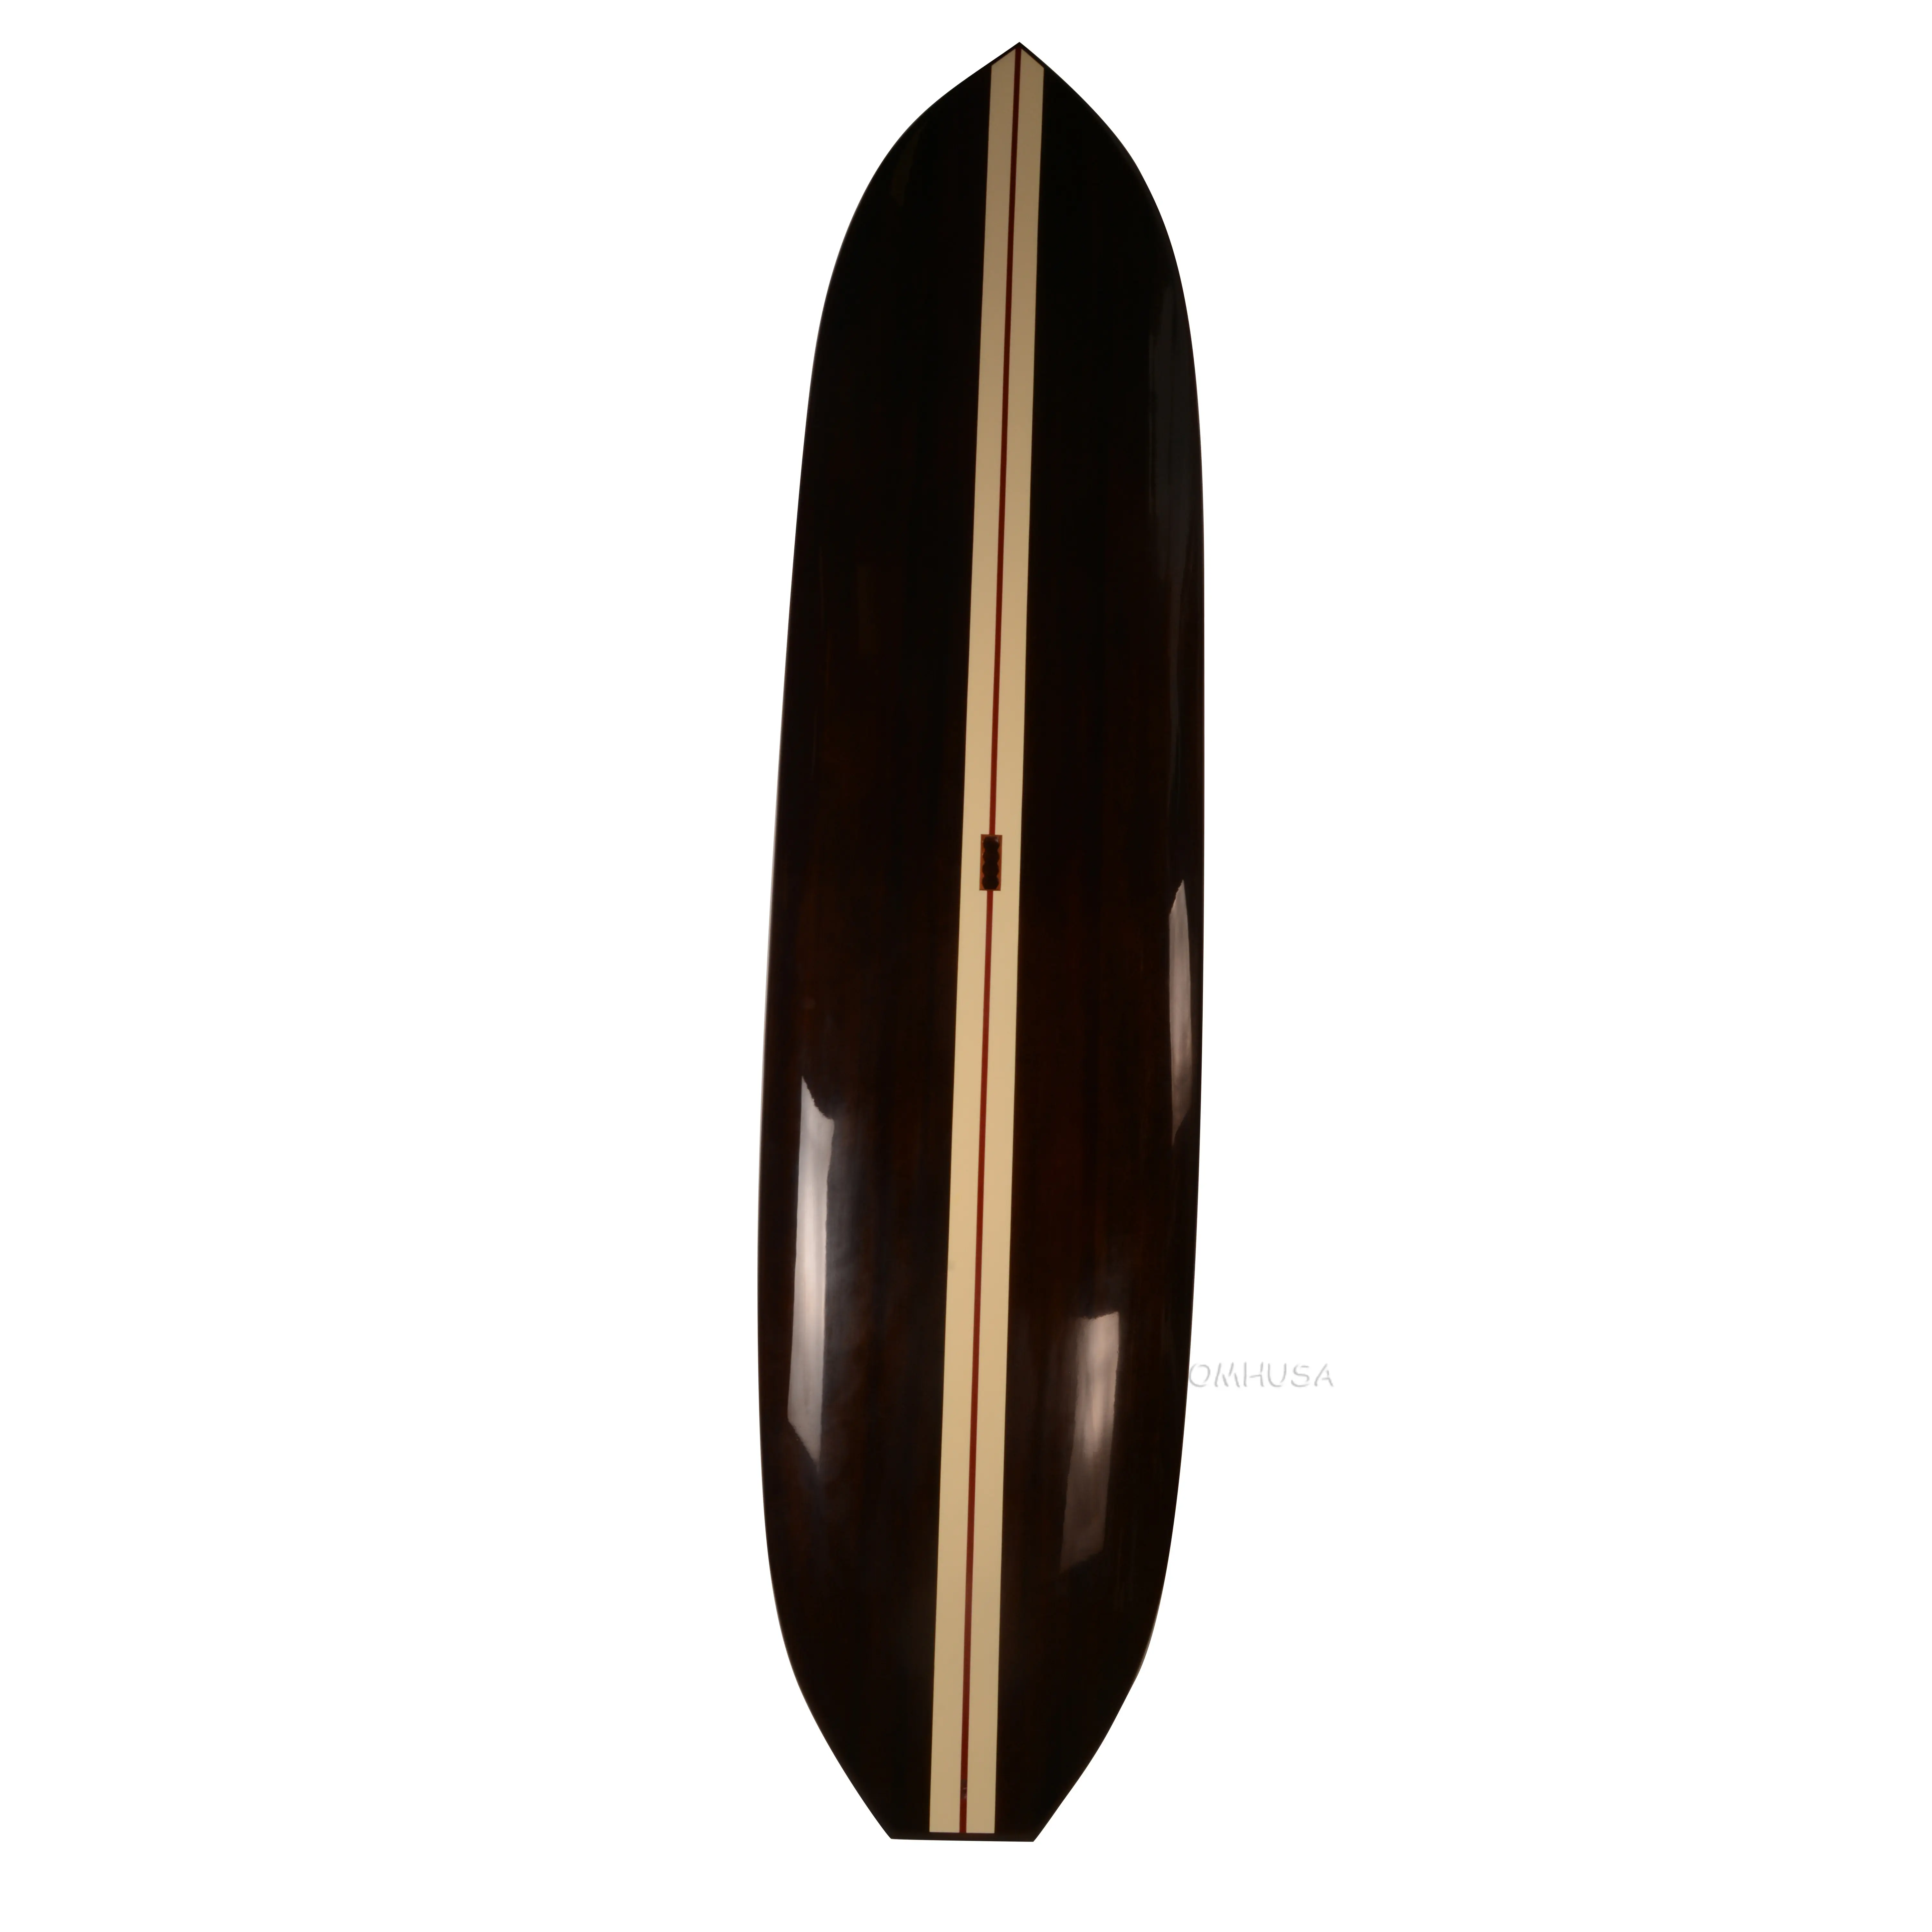 K222B Paddle Board in Dark Painted Wood 11ft with 1 fin K222B PADDLE BOARD IN DARK PAINTED WOOD 11FT WITH 1 FIN L00.WEBP